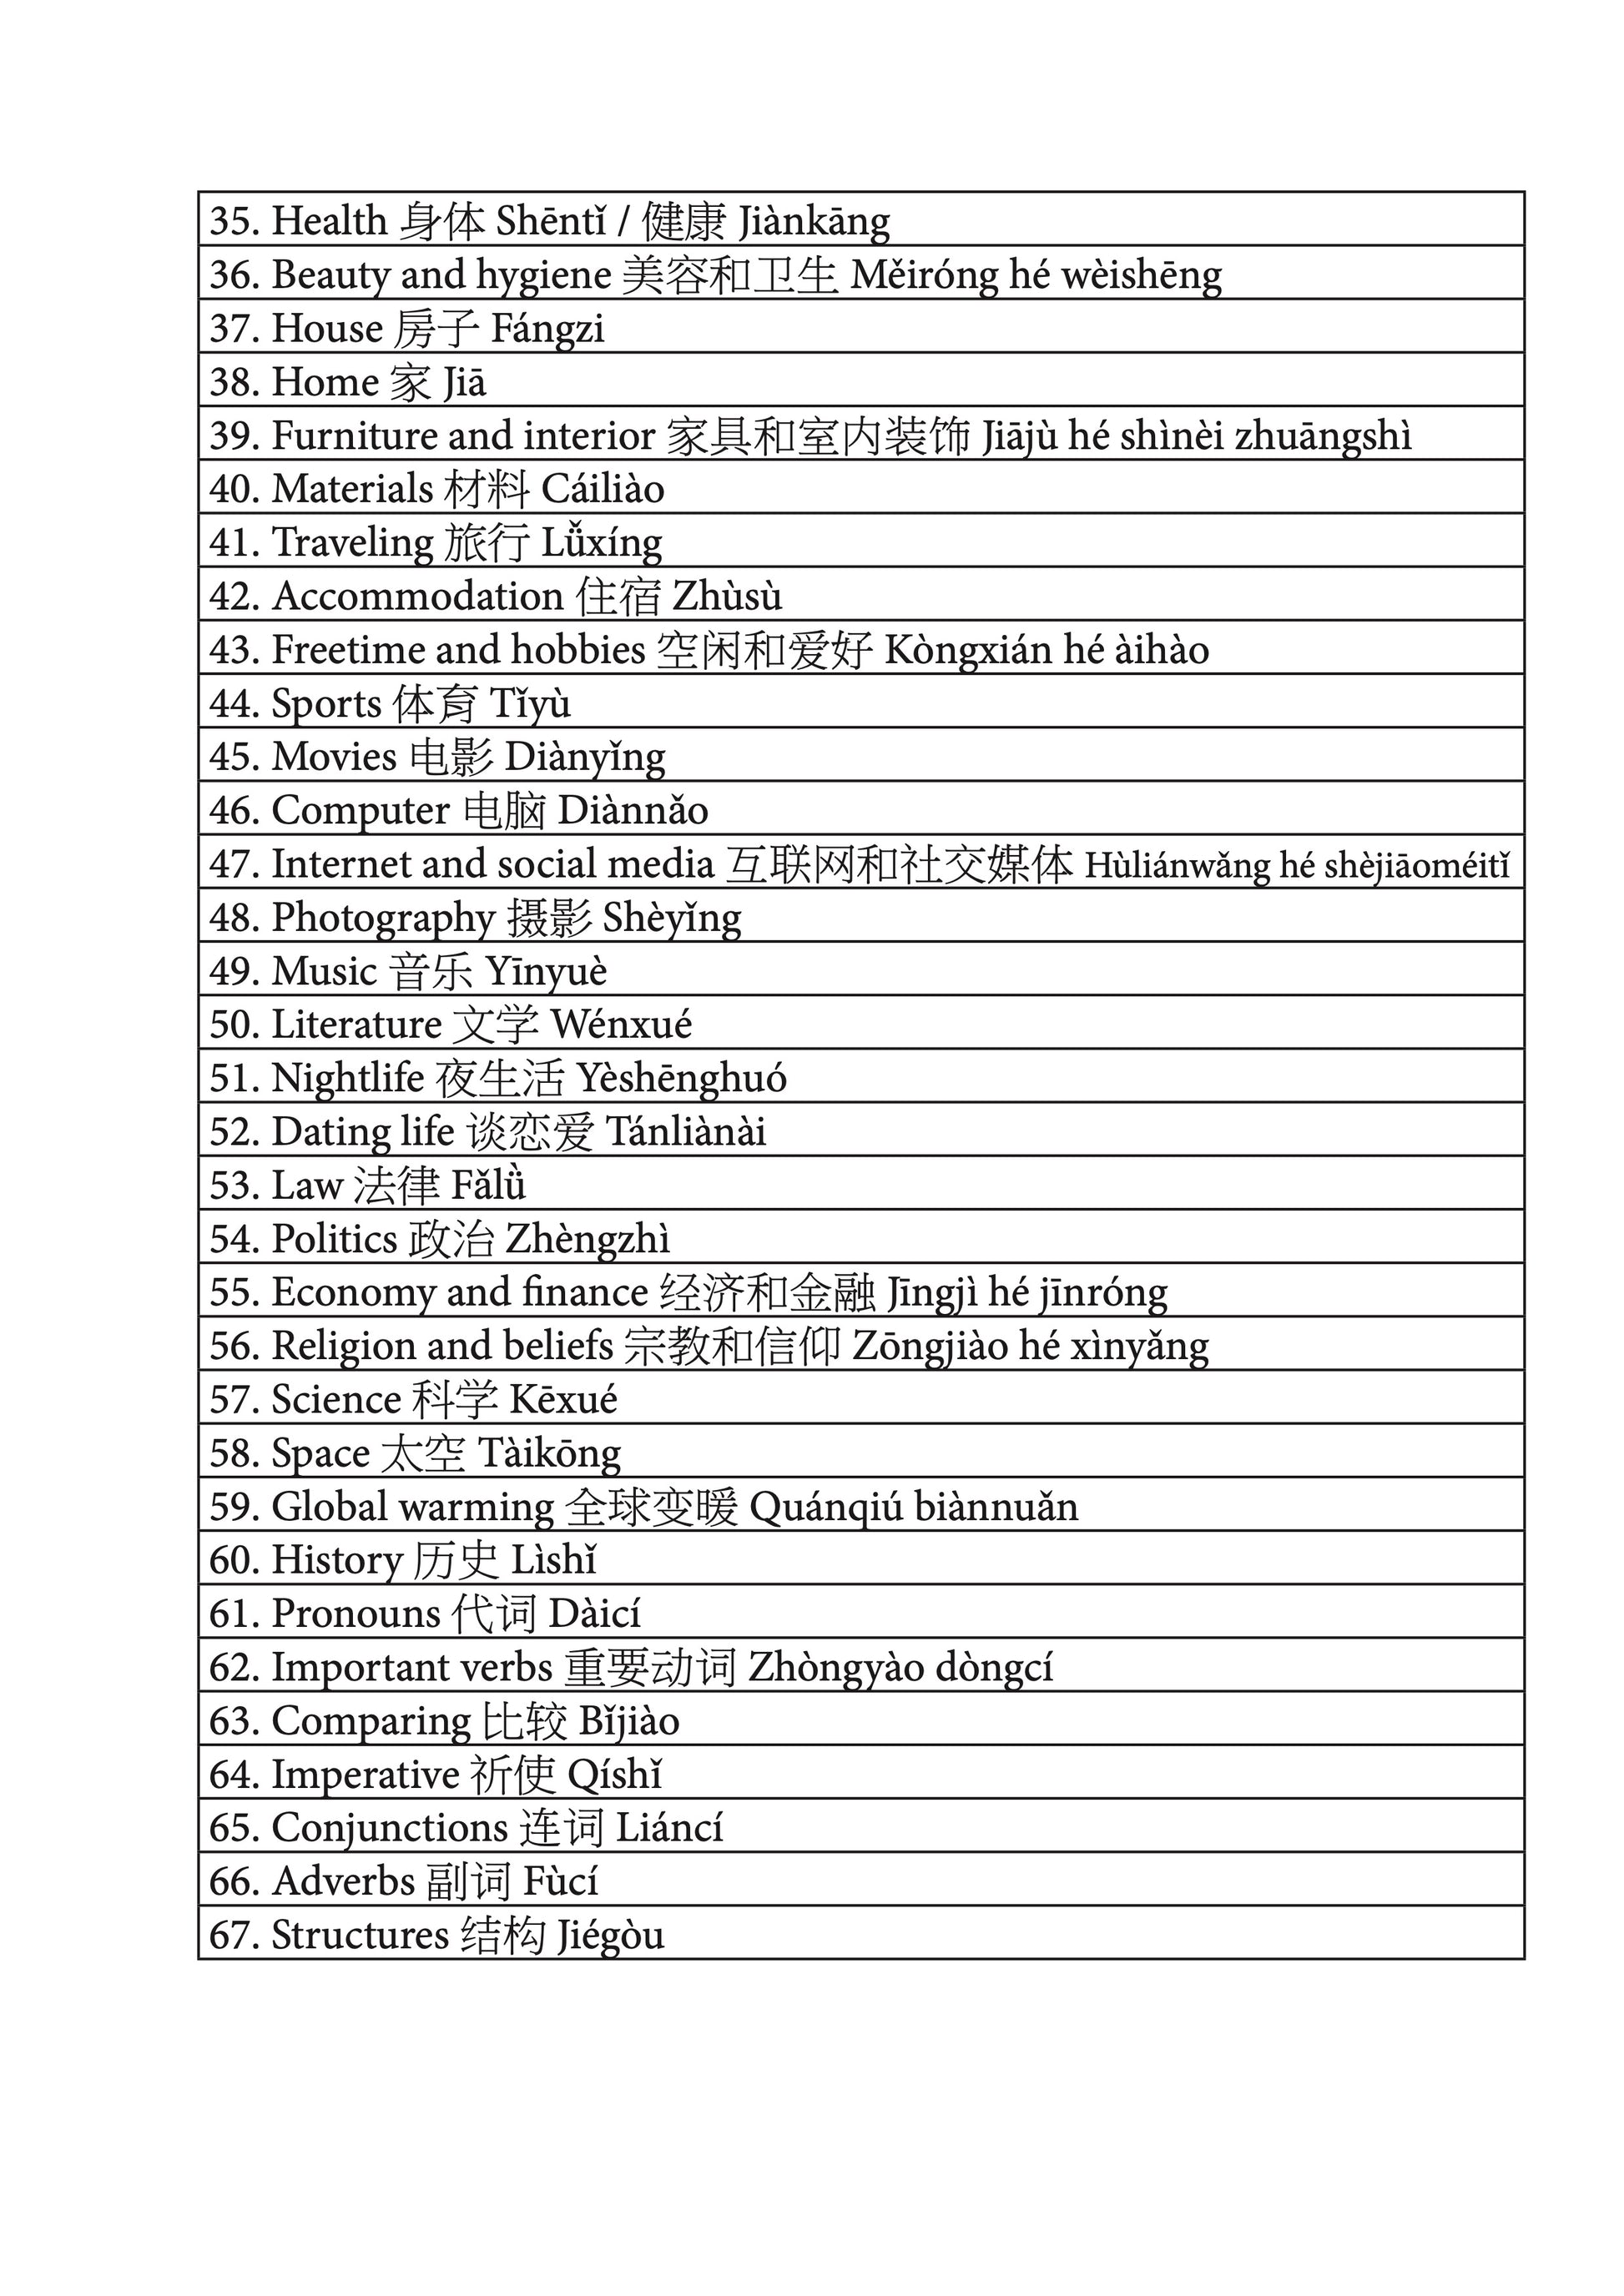 Ultimate Chinese Notebook contents page 2